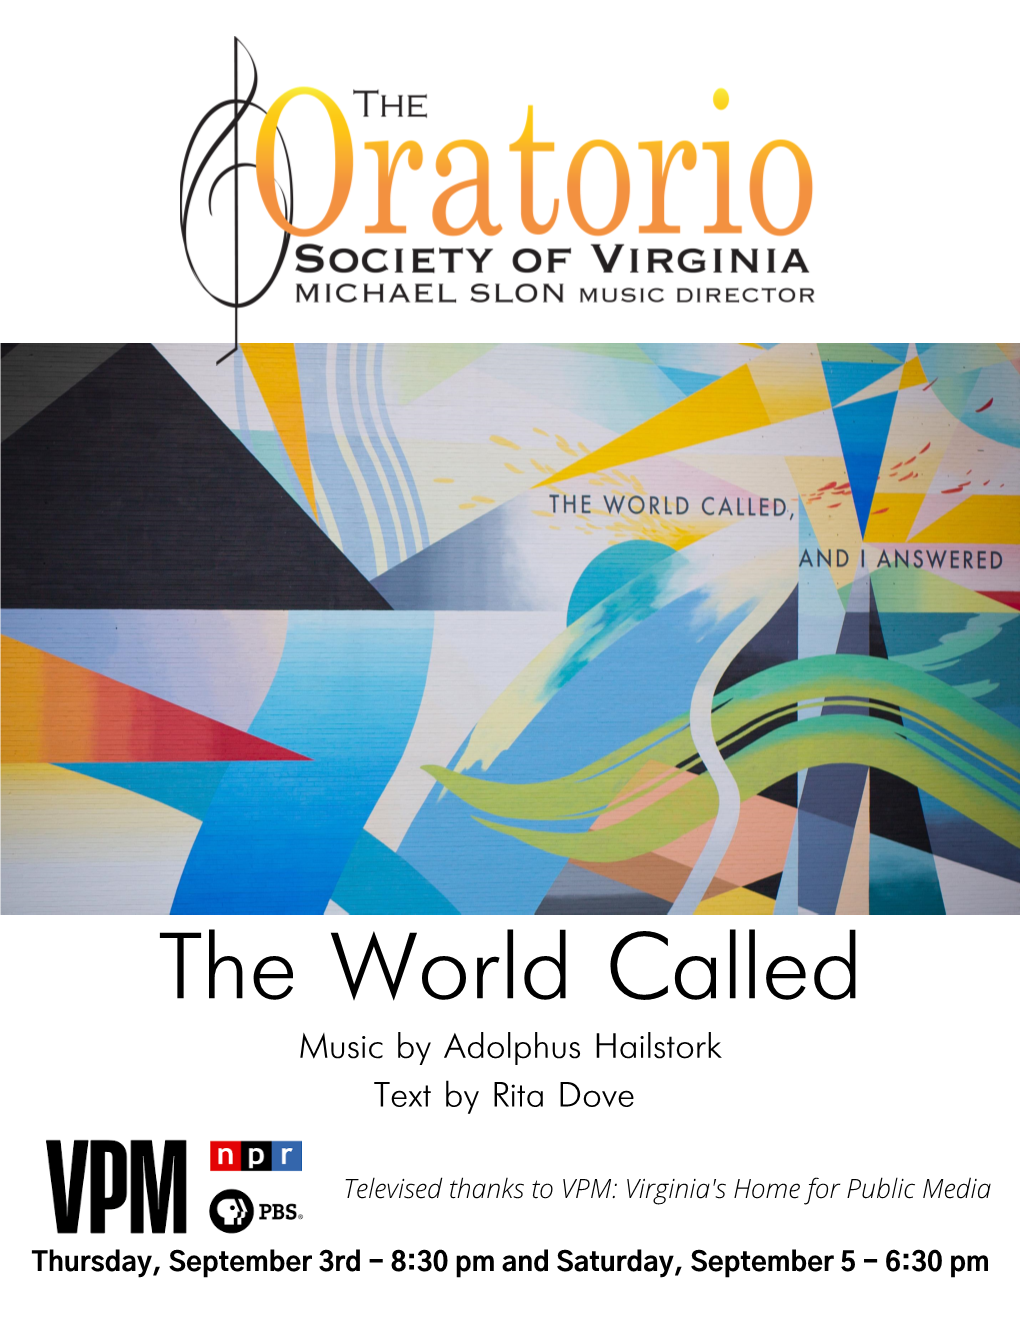 The World Called Music by Adolphus Hailstork Text by Rita Dove